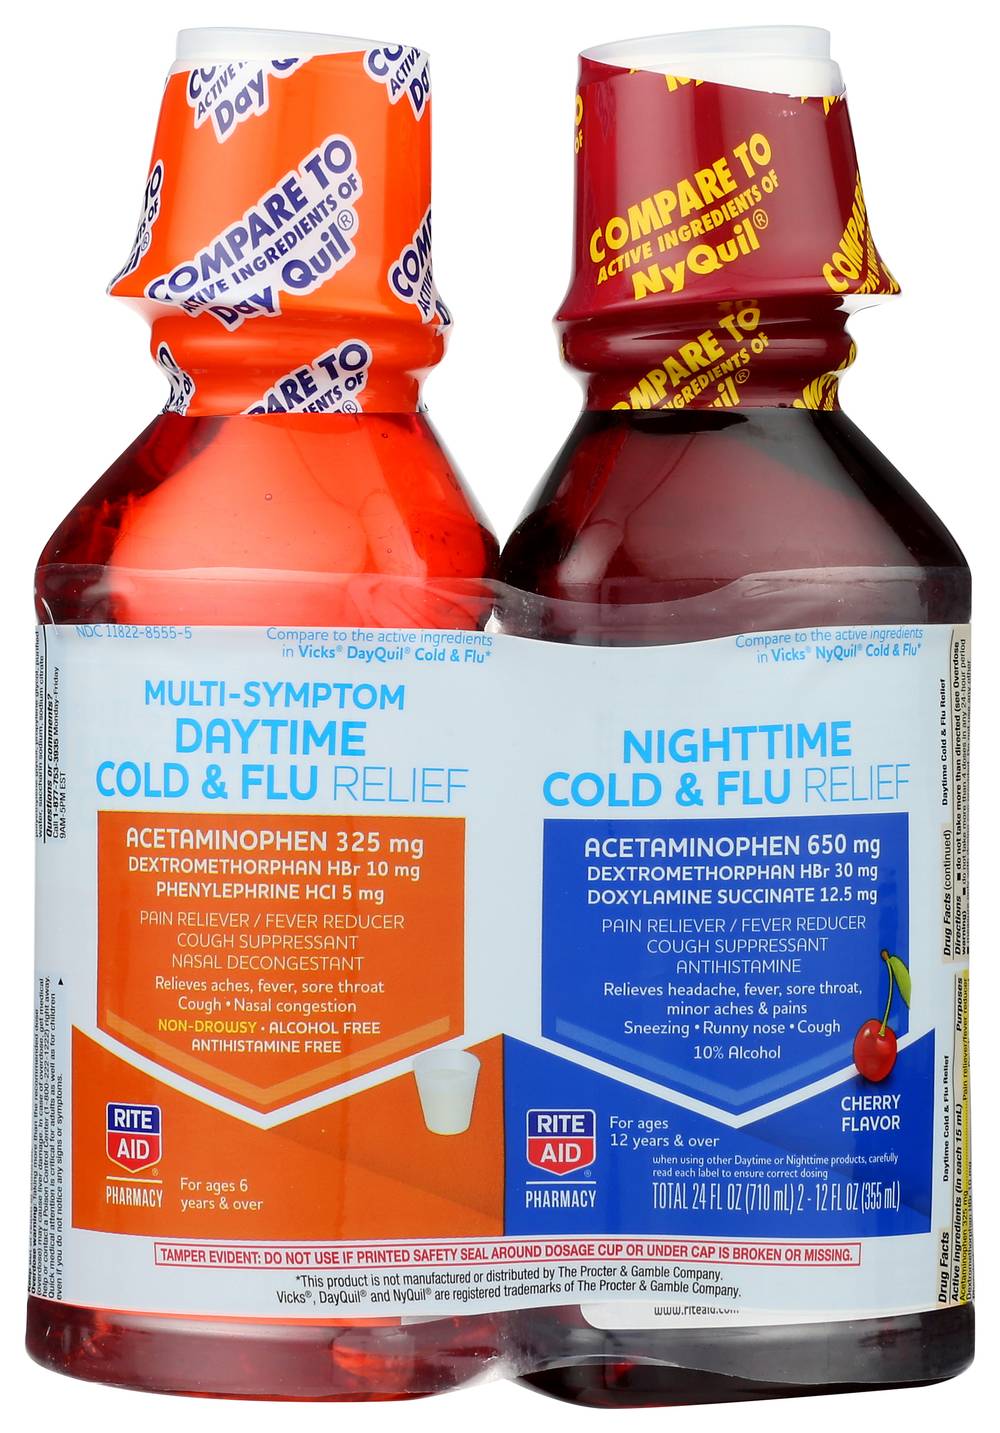 Rite Aid Daytime and Nighttime Cold and Flu Relief, Cherry, 12 fl oz - 2 pk